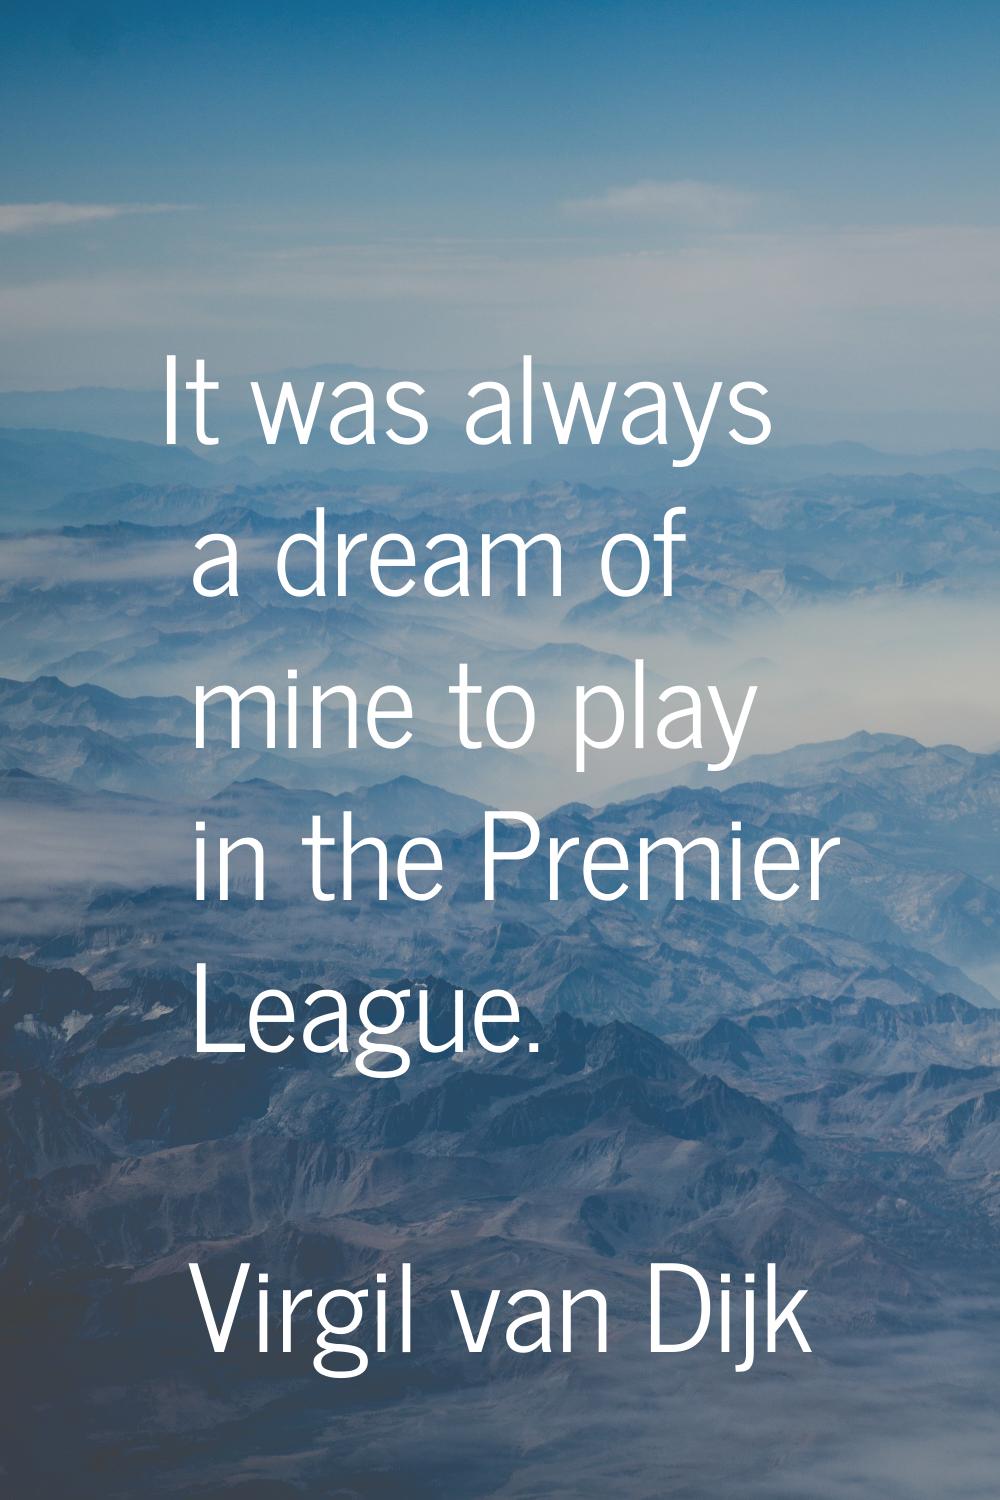 It was always a dream of mine to play in the Premier League.